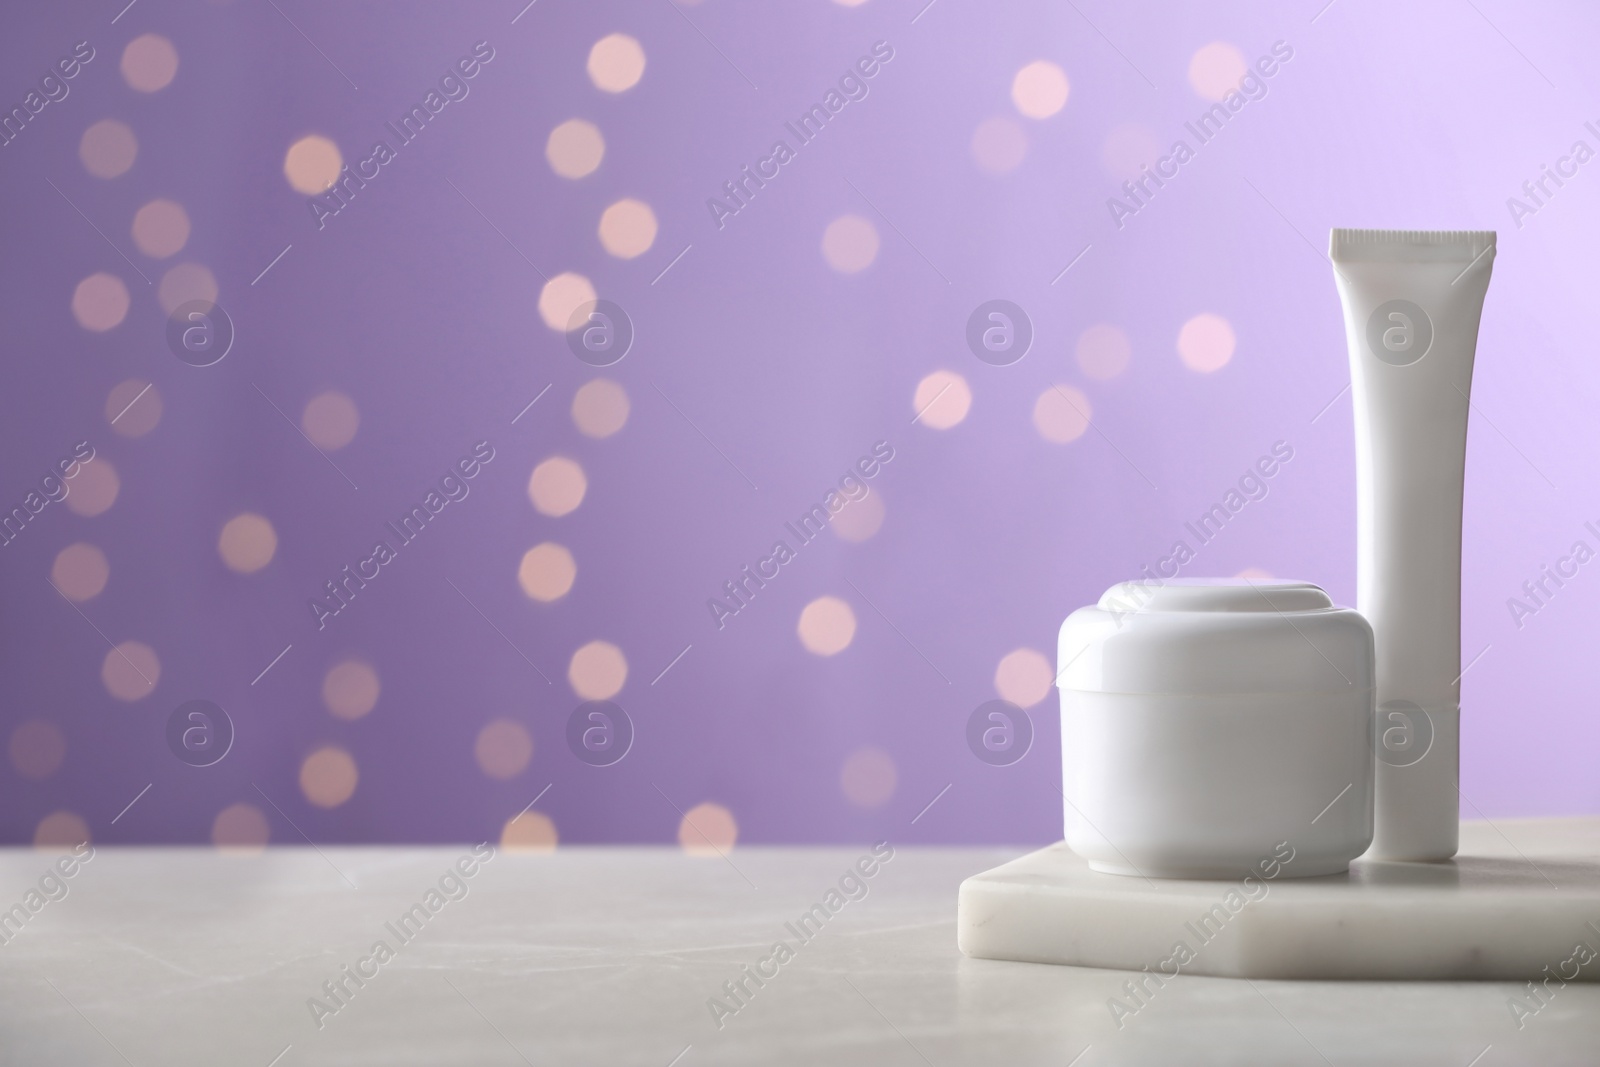 Photo of Skin care products on light table against blurred lights, space for text